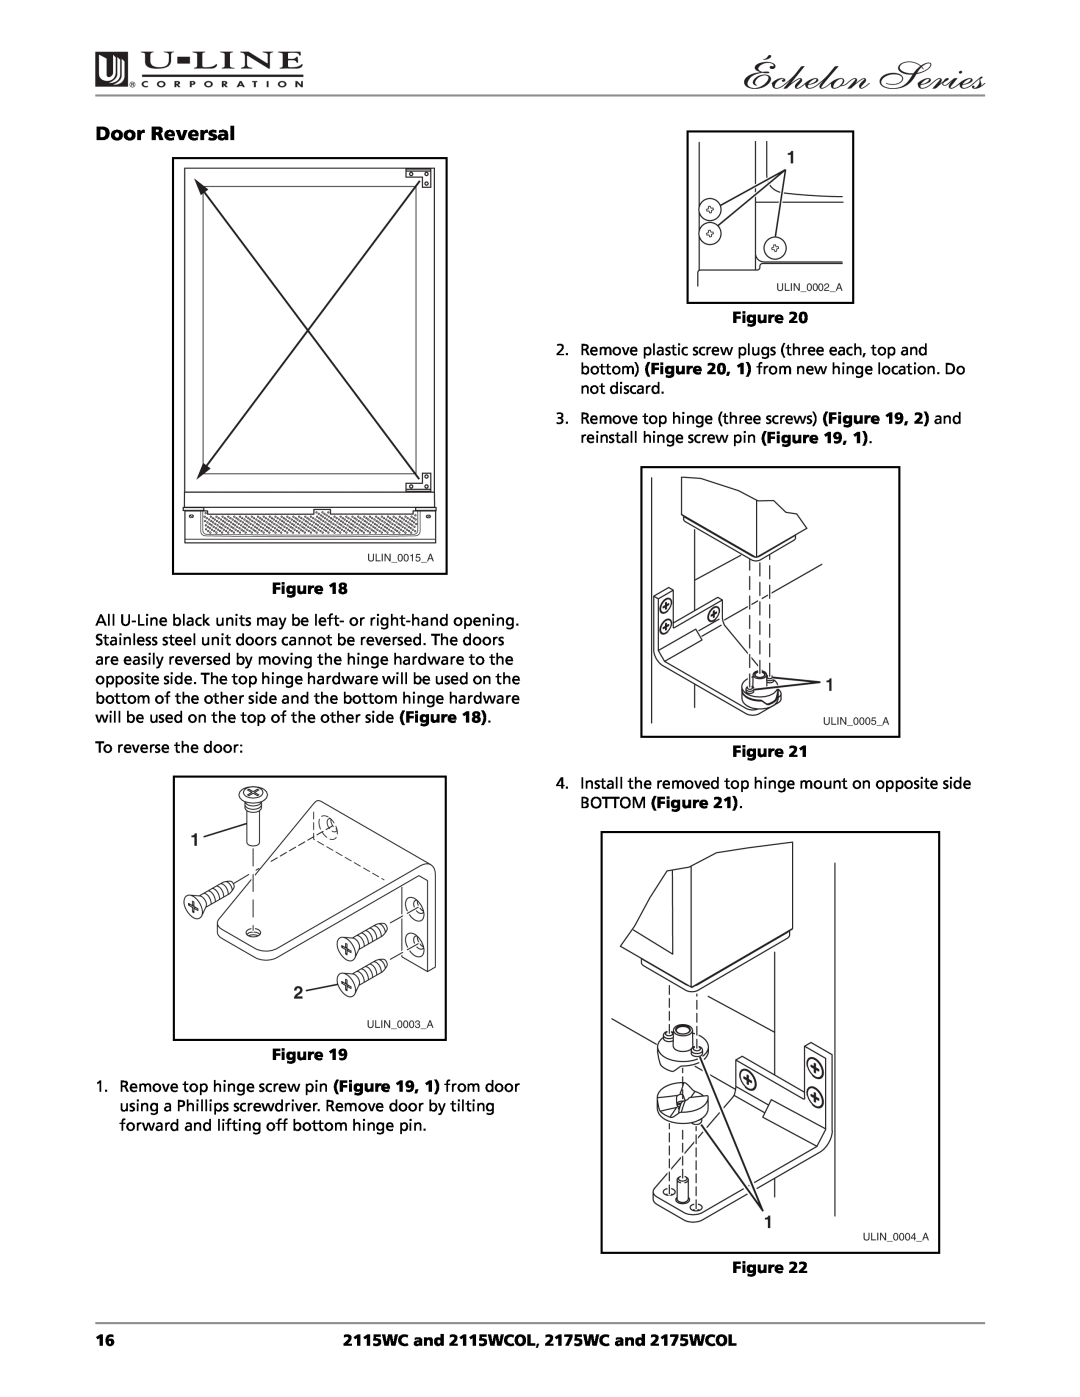 U-Line manual Door Reversal, 2115WC and 2115WCOL, 2175WC and 2175WCOL 